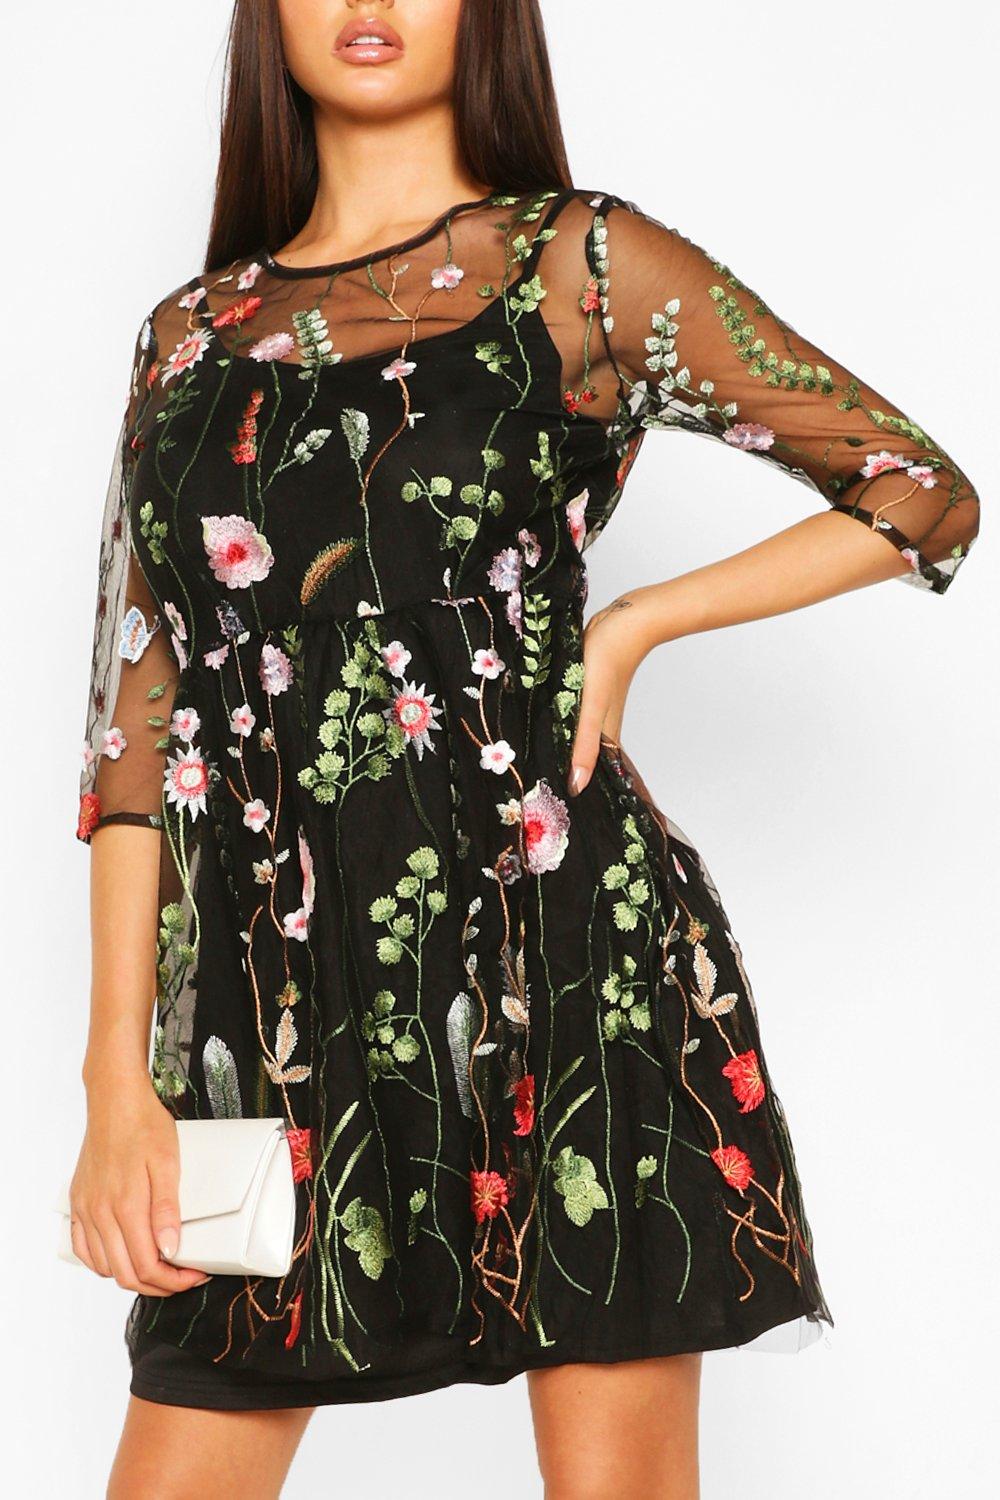 Floral Embroidery Mesh Overlay Dress ...